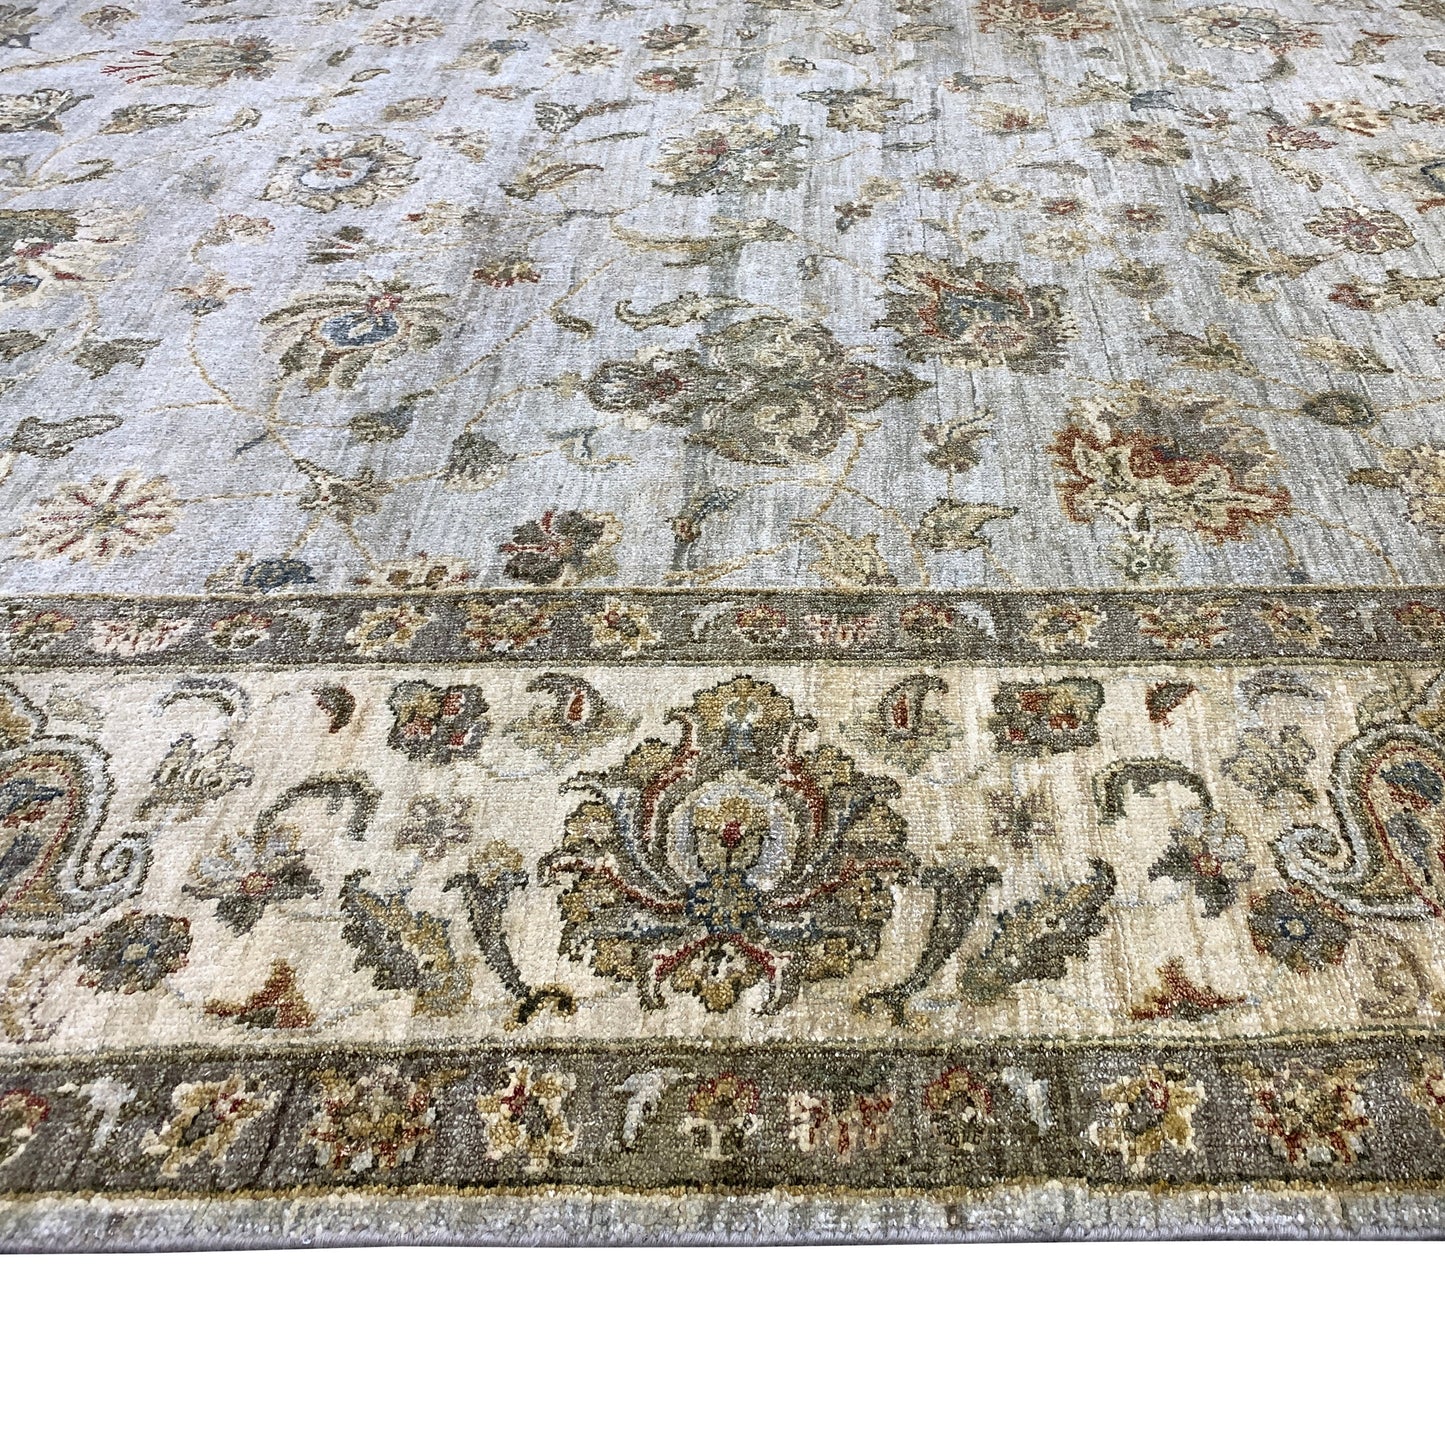 Get trendy with Elegacy Silver and Ivory Traditional Agra Floral Pure Silk Handknotted Area Rug - Traditional Rugs available at Jaipur Oriental Rugs. Grab yours for $5750.00 today!